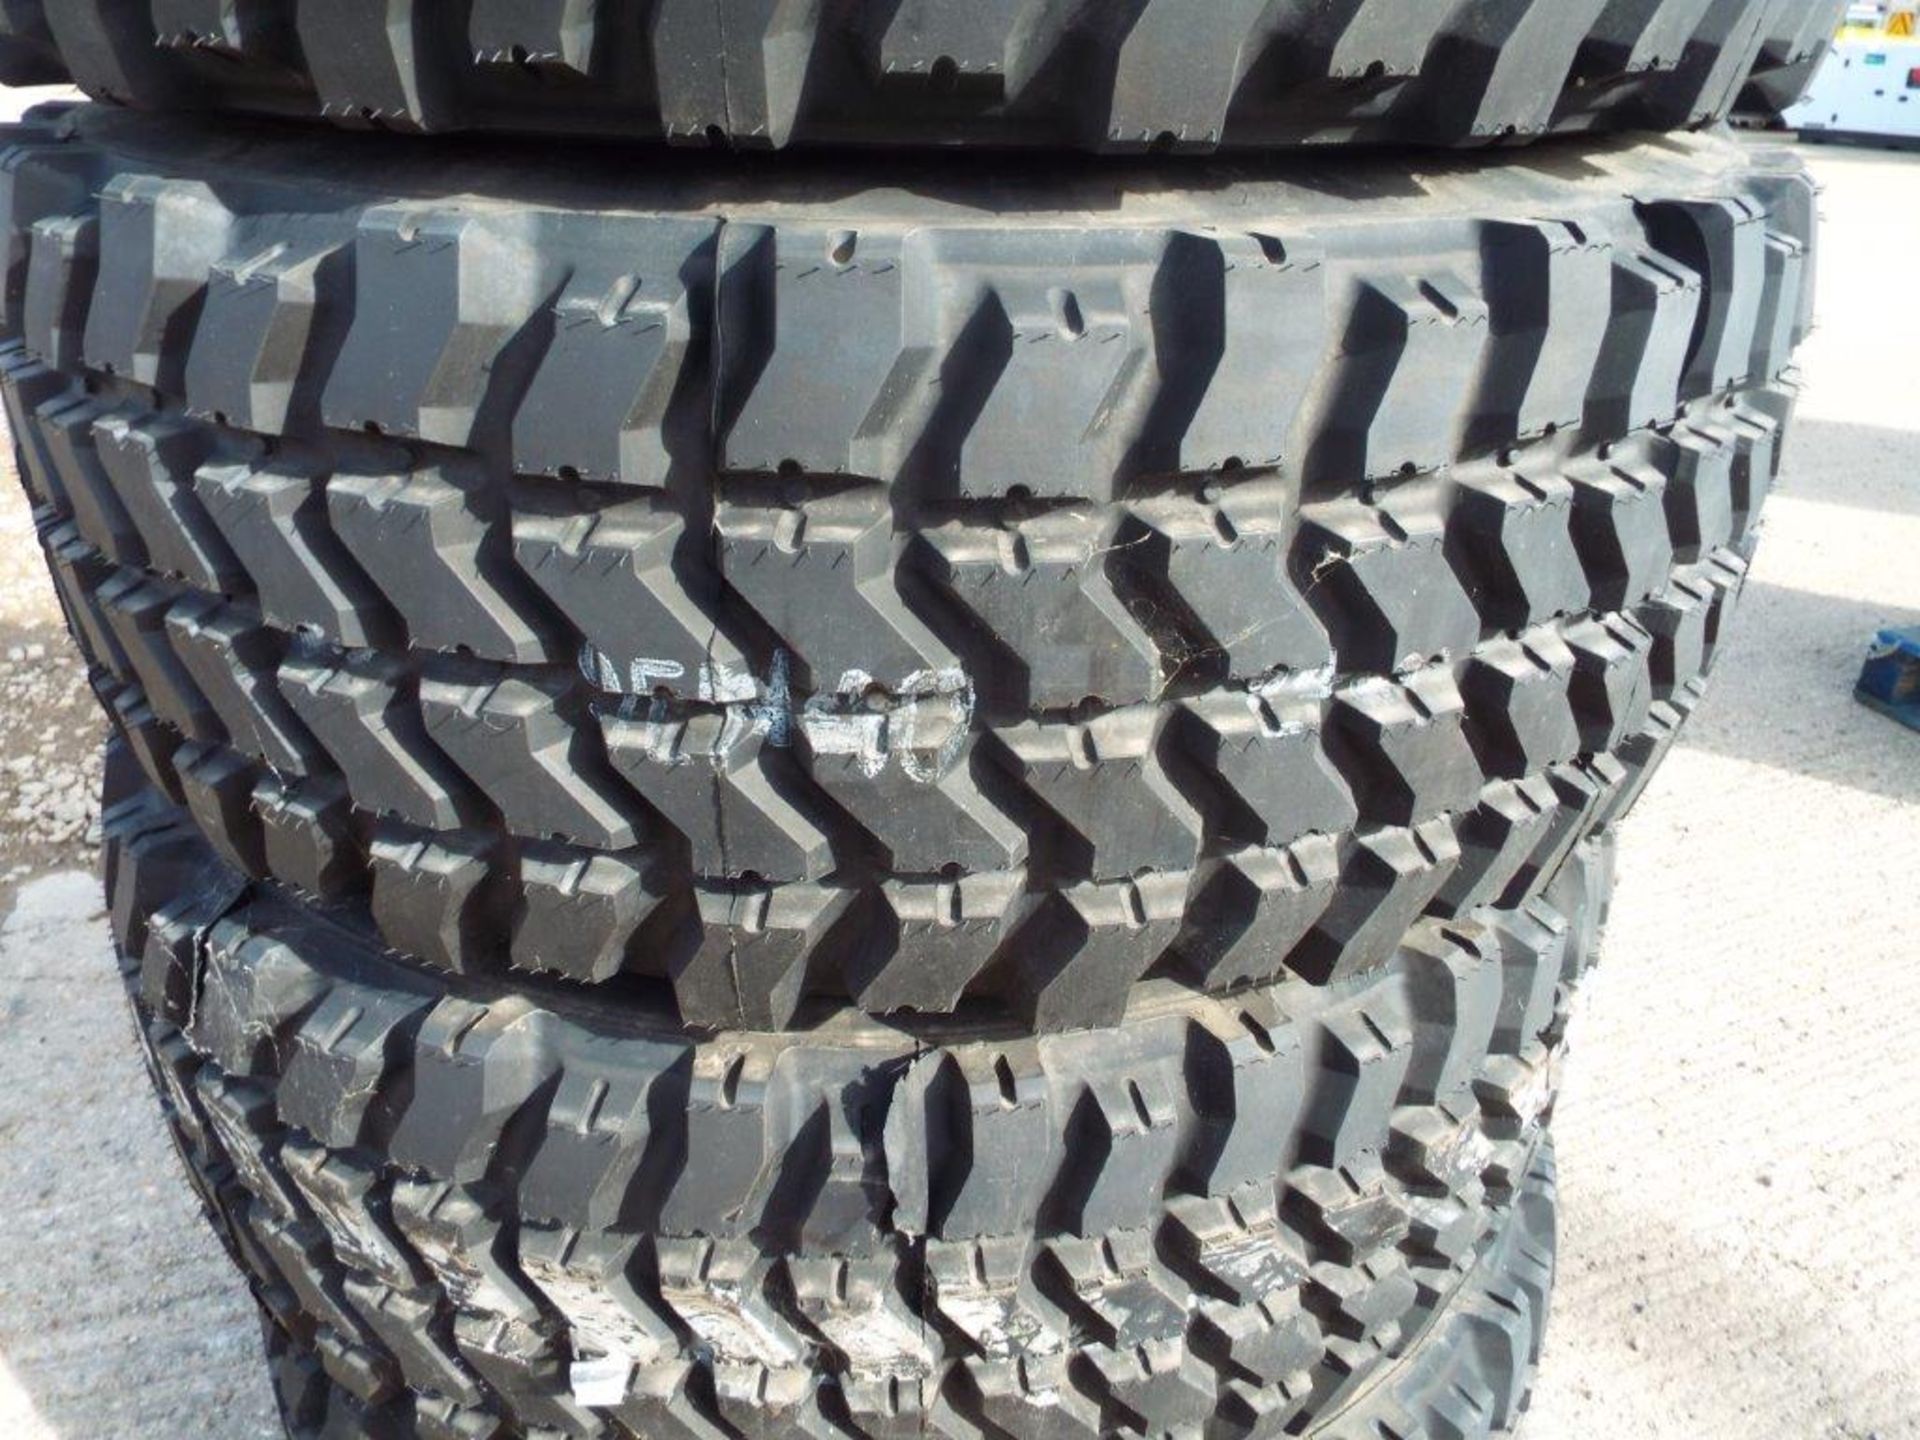 4 x Goodyear MV/T 395/85 R20 Tyres with 10 Stud Rims - Image 4 of 10